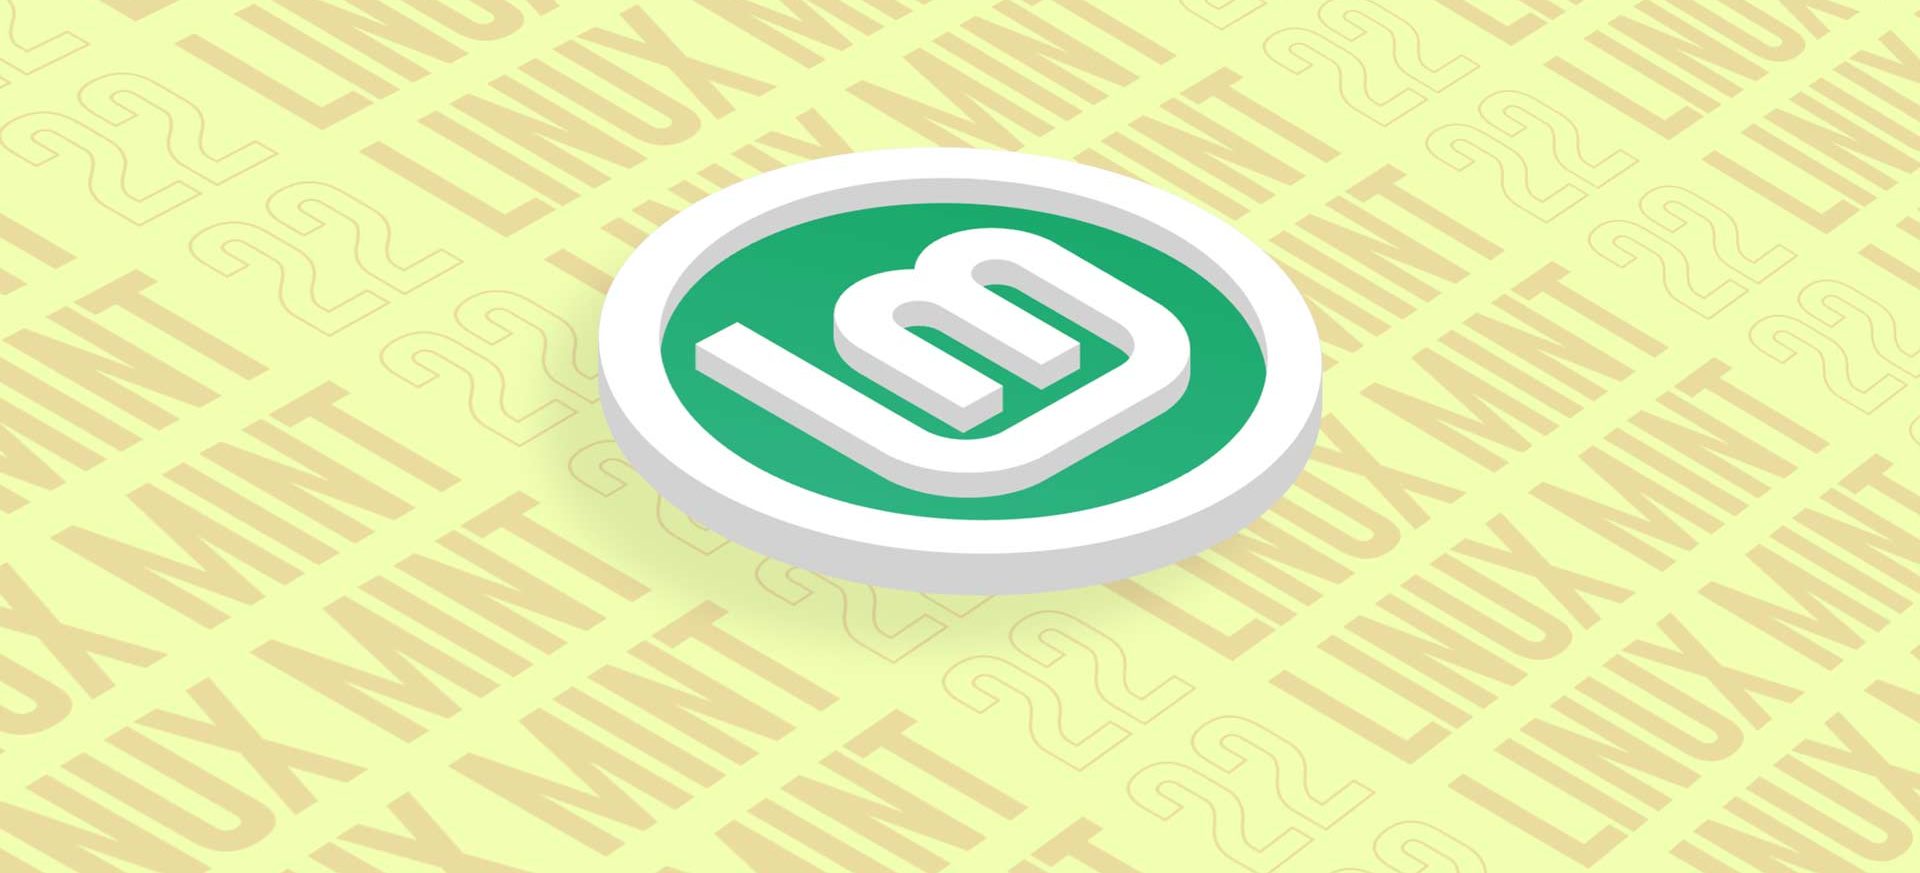 Linux Mint logo on yellow background with black text saying the distro name